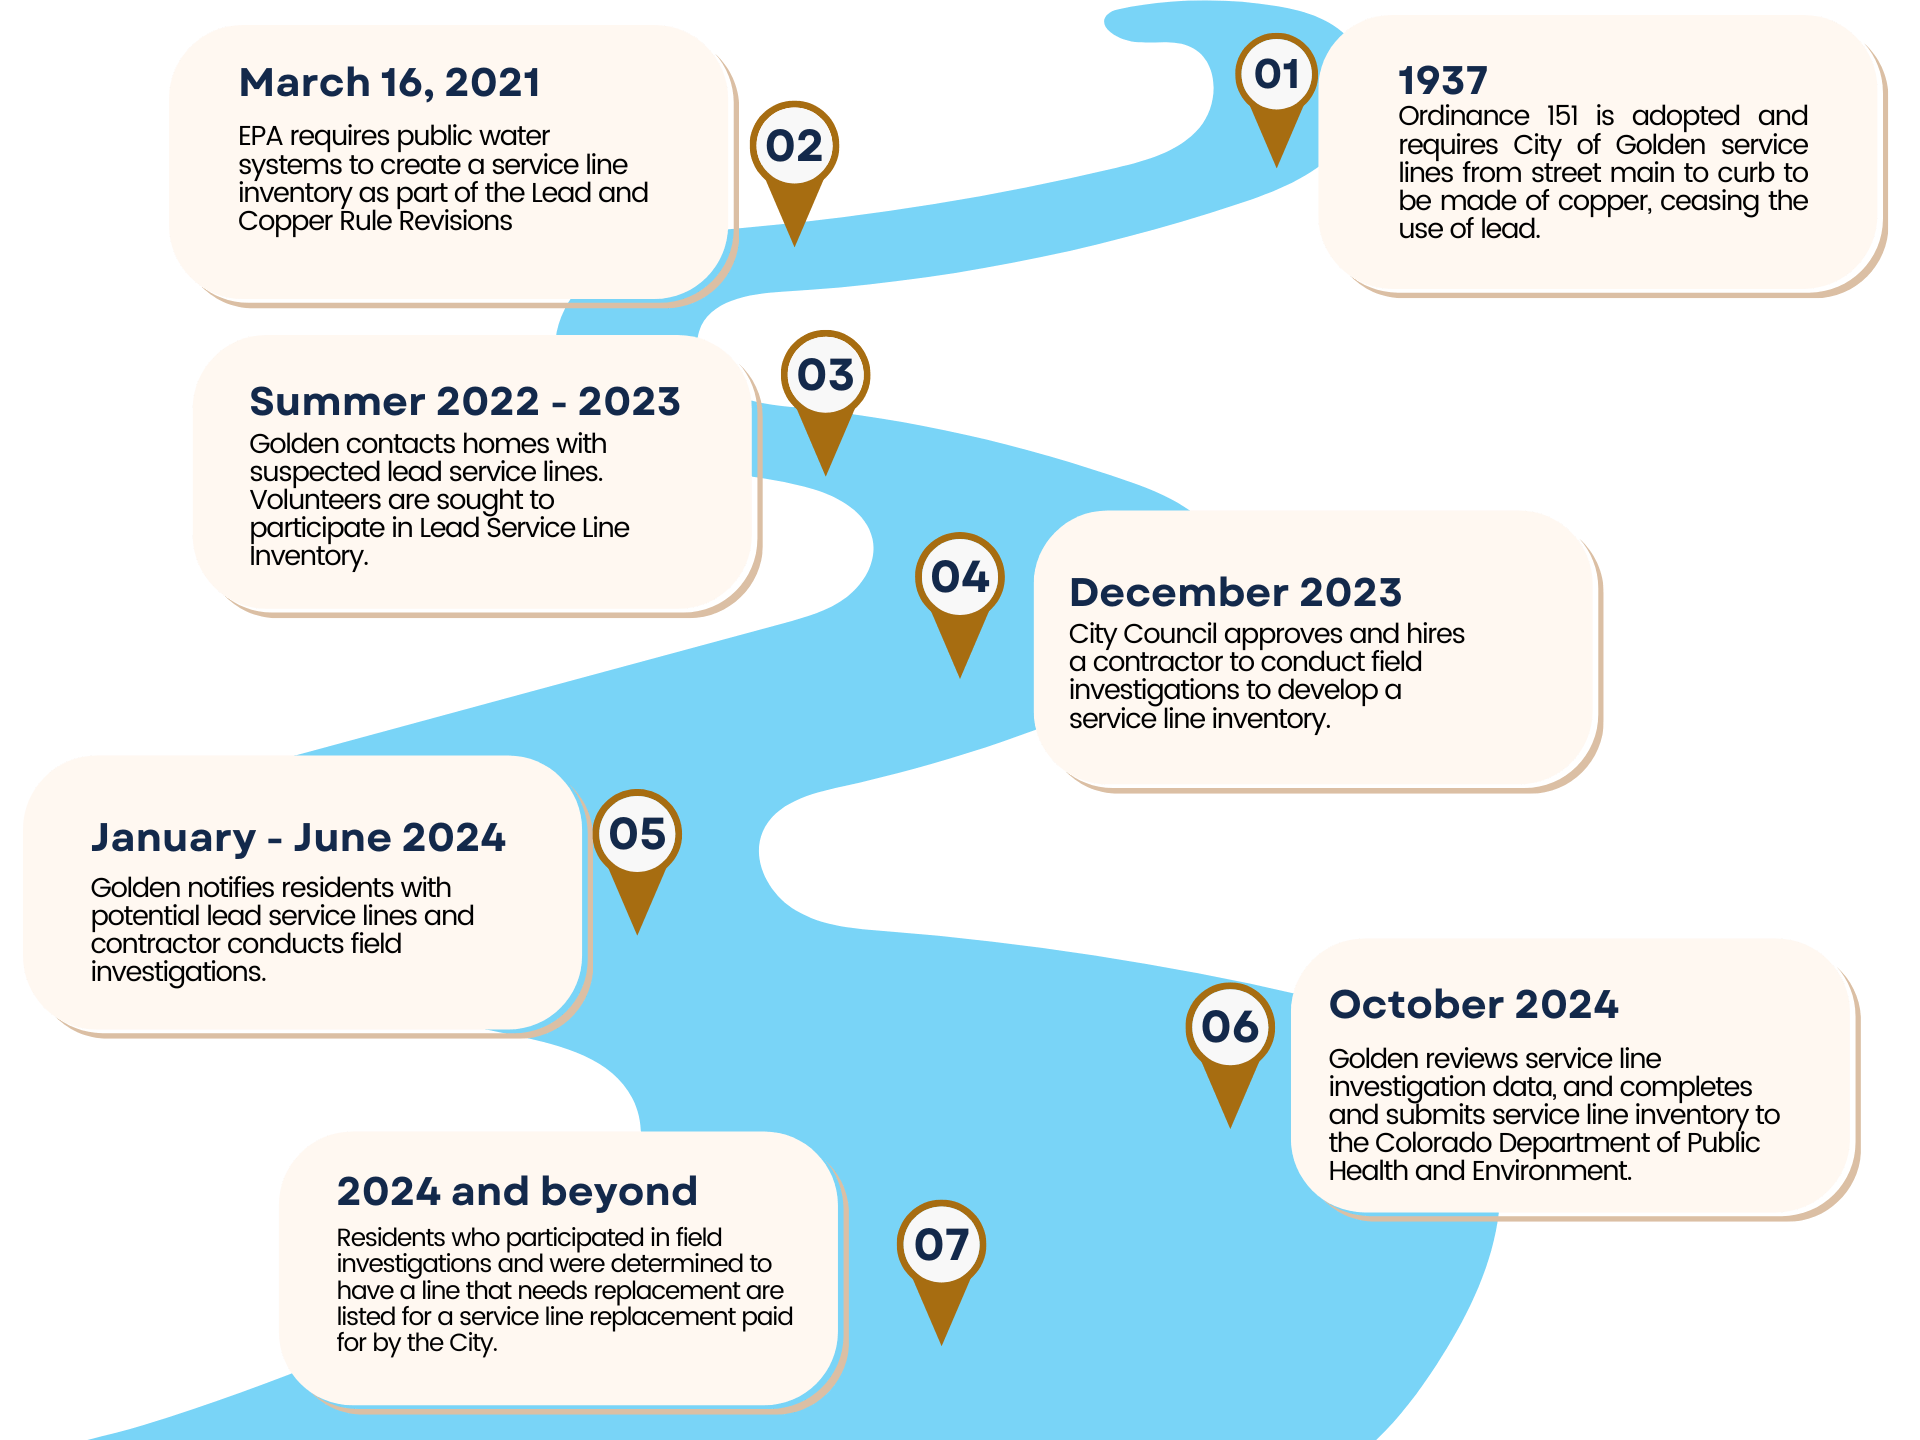 Golden Lead Service Line timeline spanning from 1937 to the present.